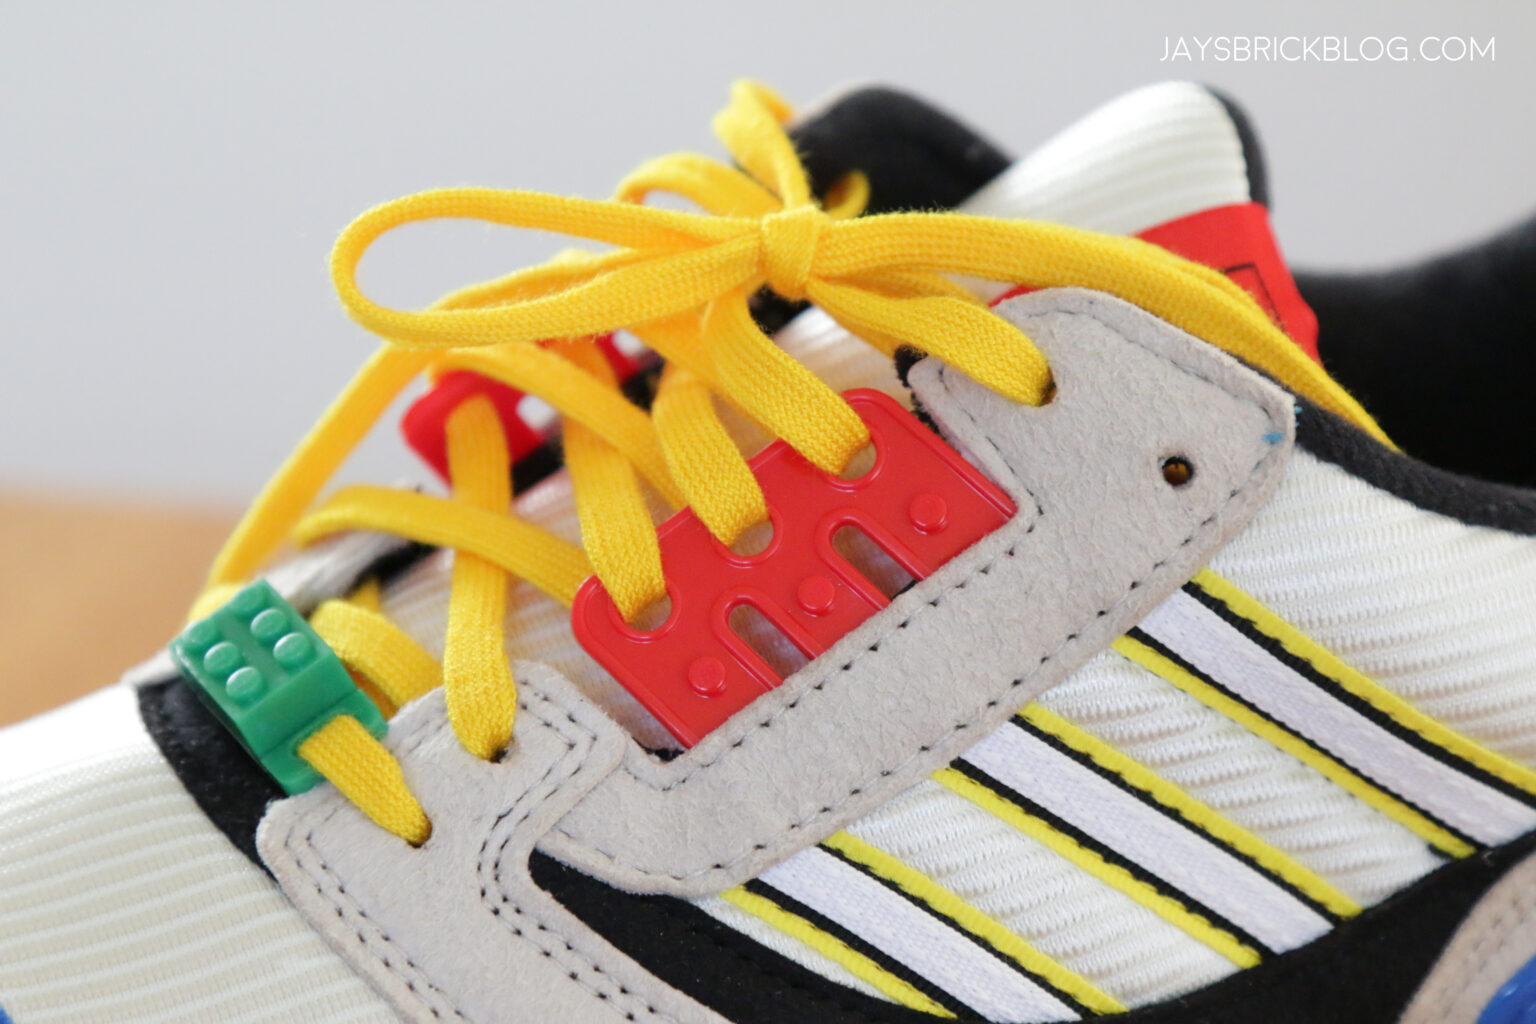 Review: LEGO x Adidas ZX 8000 Sneaker - Jay's Brick Blog